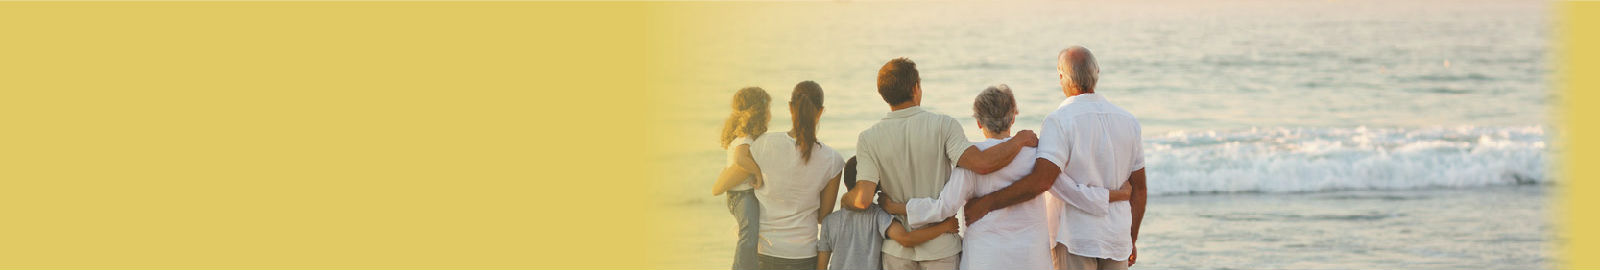 Advanced Planning - Family on Beach Image